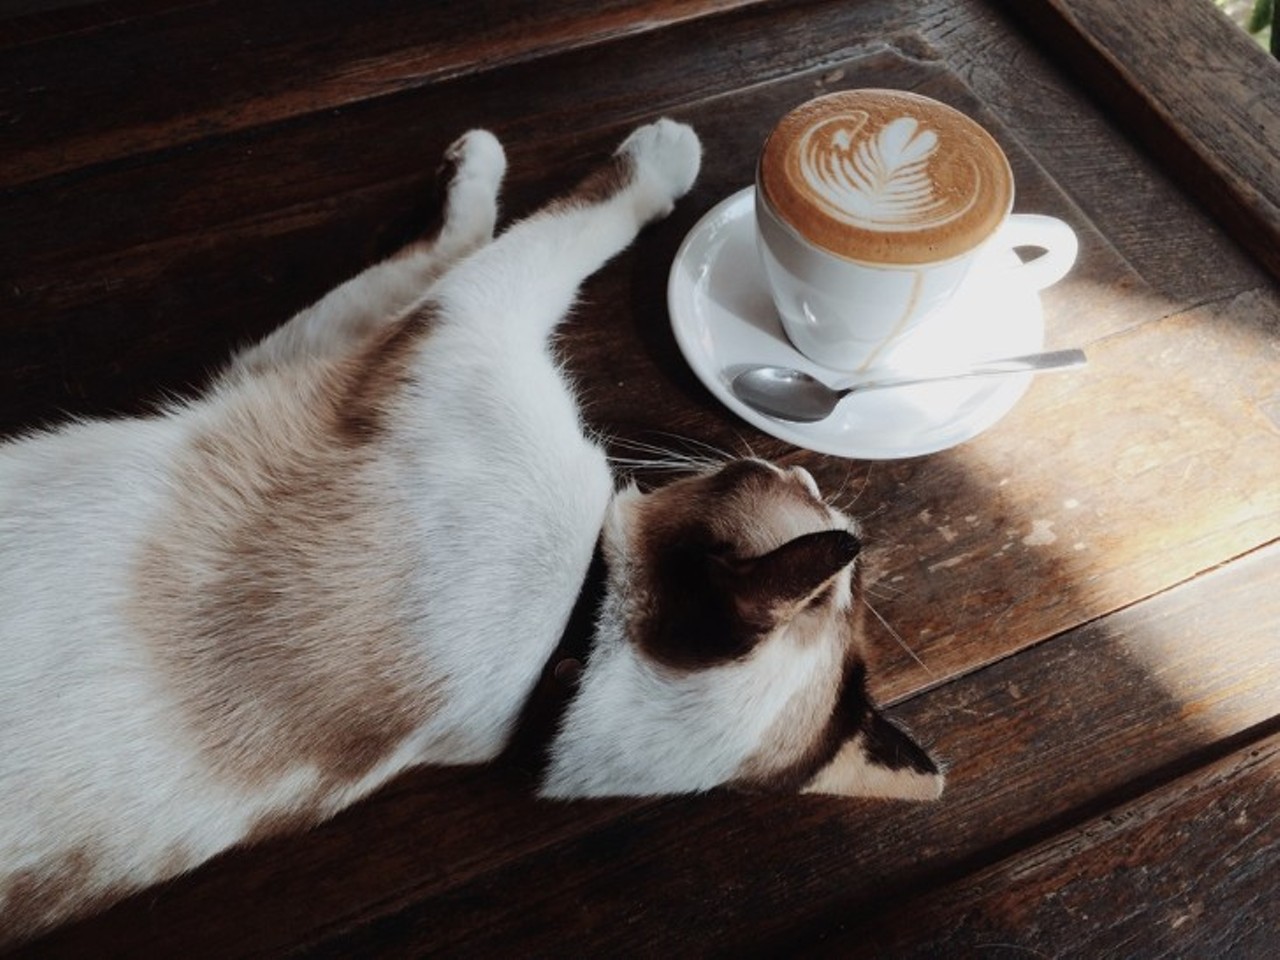 Make a new feline friend at Catfe Lounge
821 Livernois Ave., Ferndale
The cafe serves as a spot for visitors to come and connect with shelter cats in a relaxed setting. Patrons are also able to adopt any of the cats that roam throughout the cafe.
Photo via Mutita Narkmuang/Shutterstock